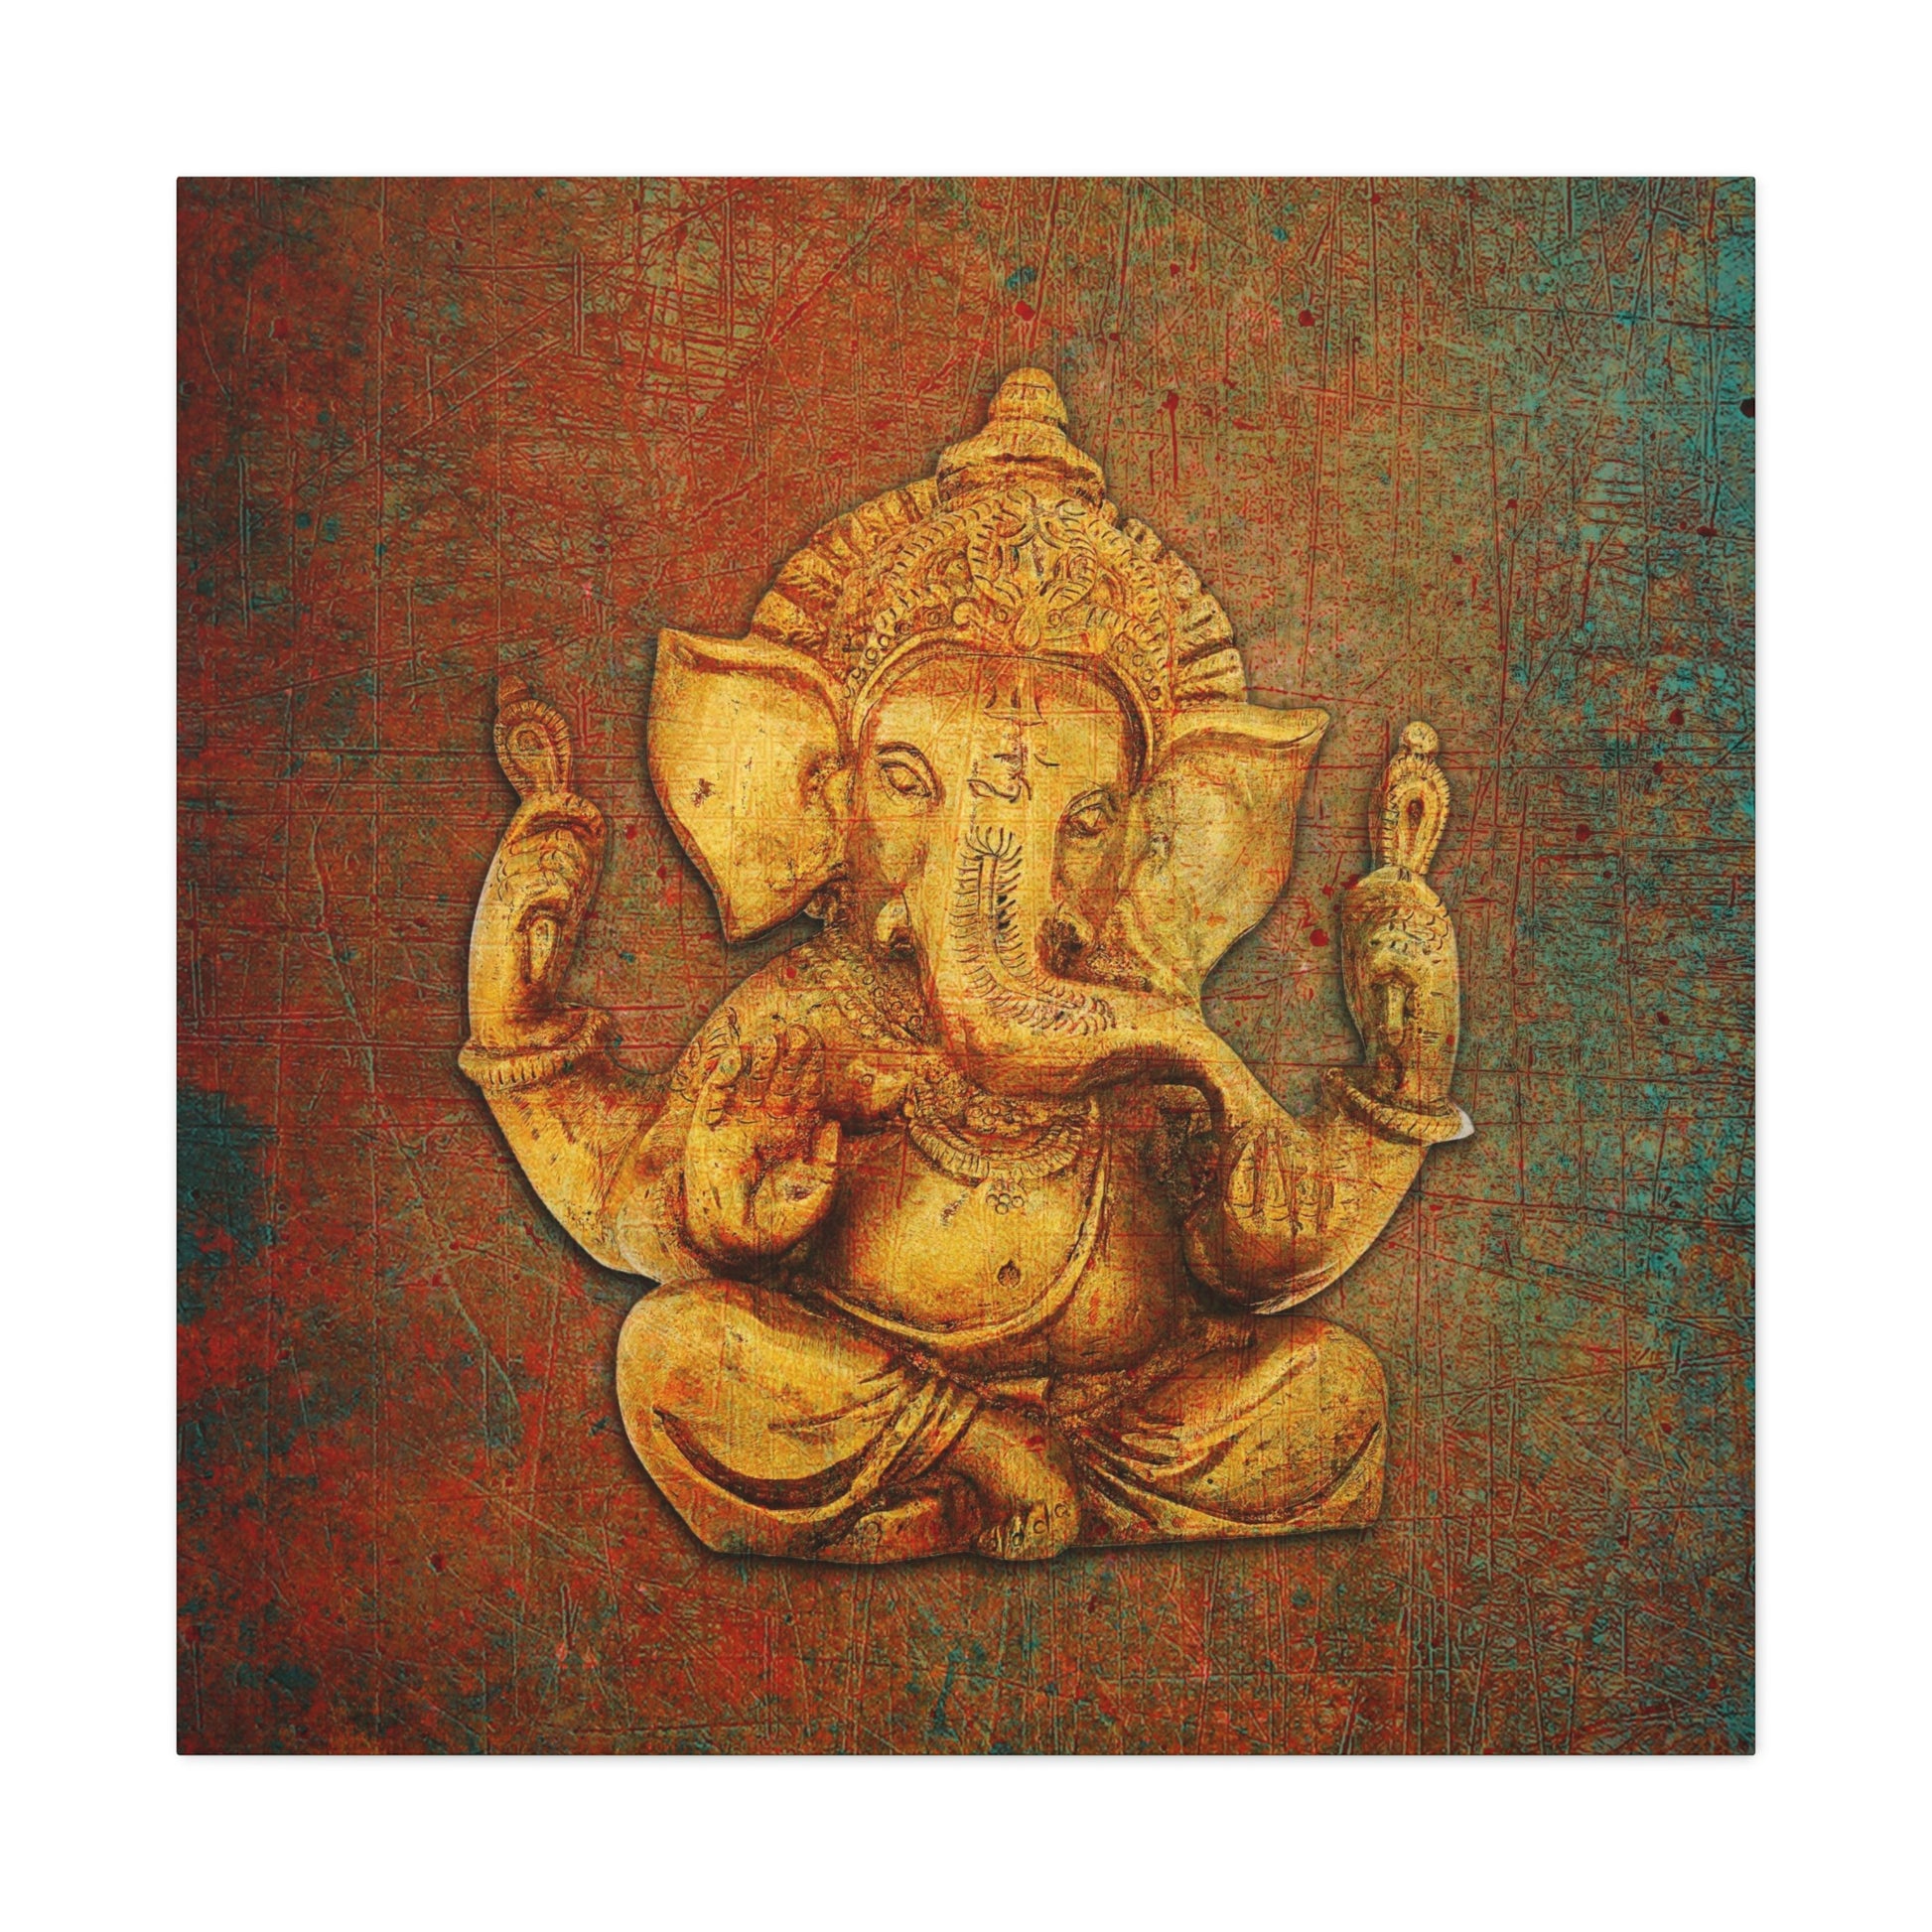 Ganesha on a Distressed Background Printed on Unframed Stretched Canvas 5 sizes available